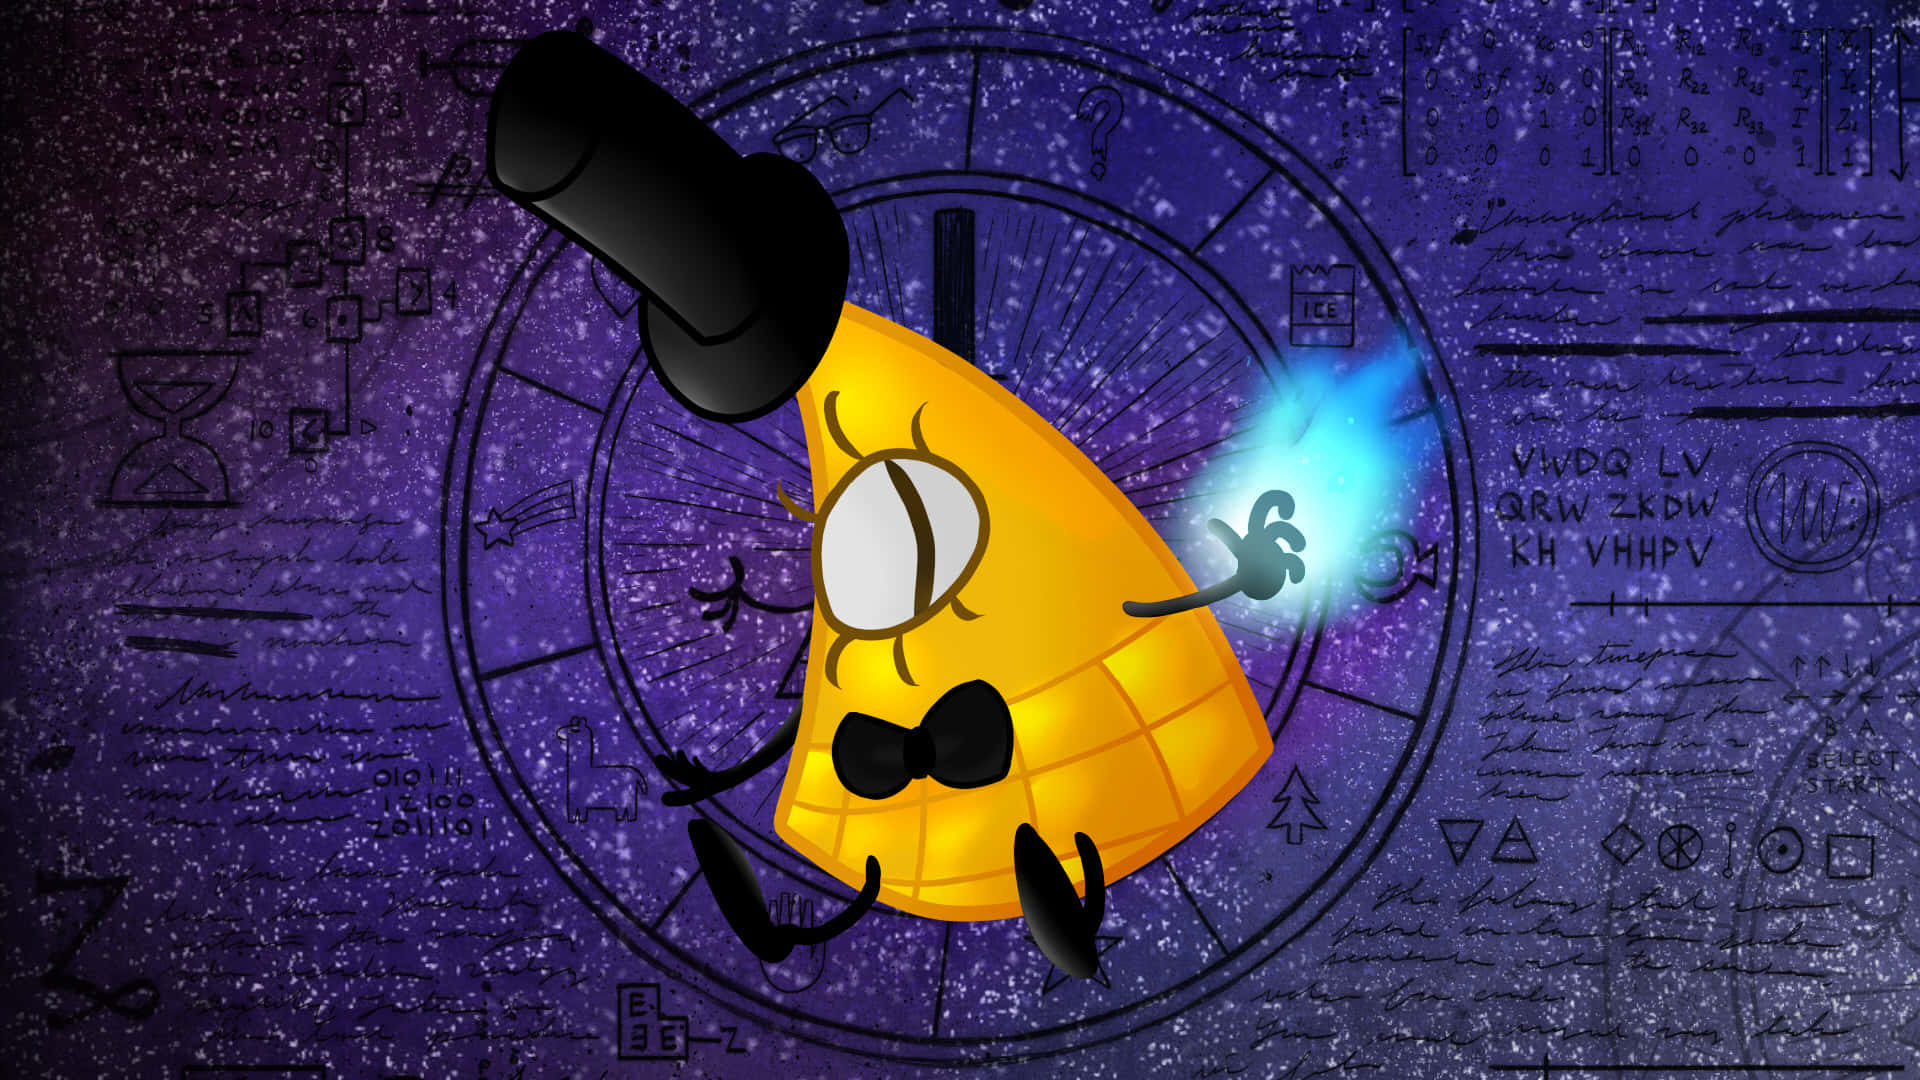 Enter A World Of Mystery With Bill Cipher And His Secrets.